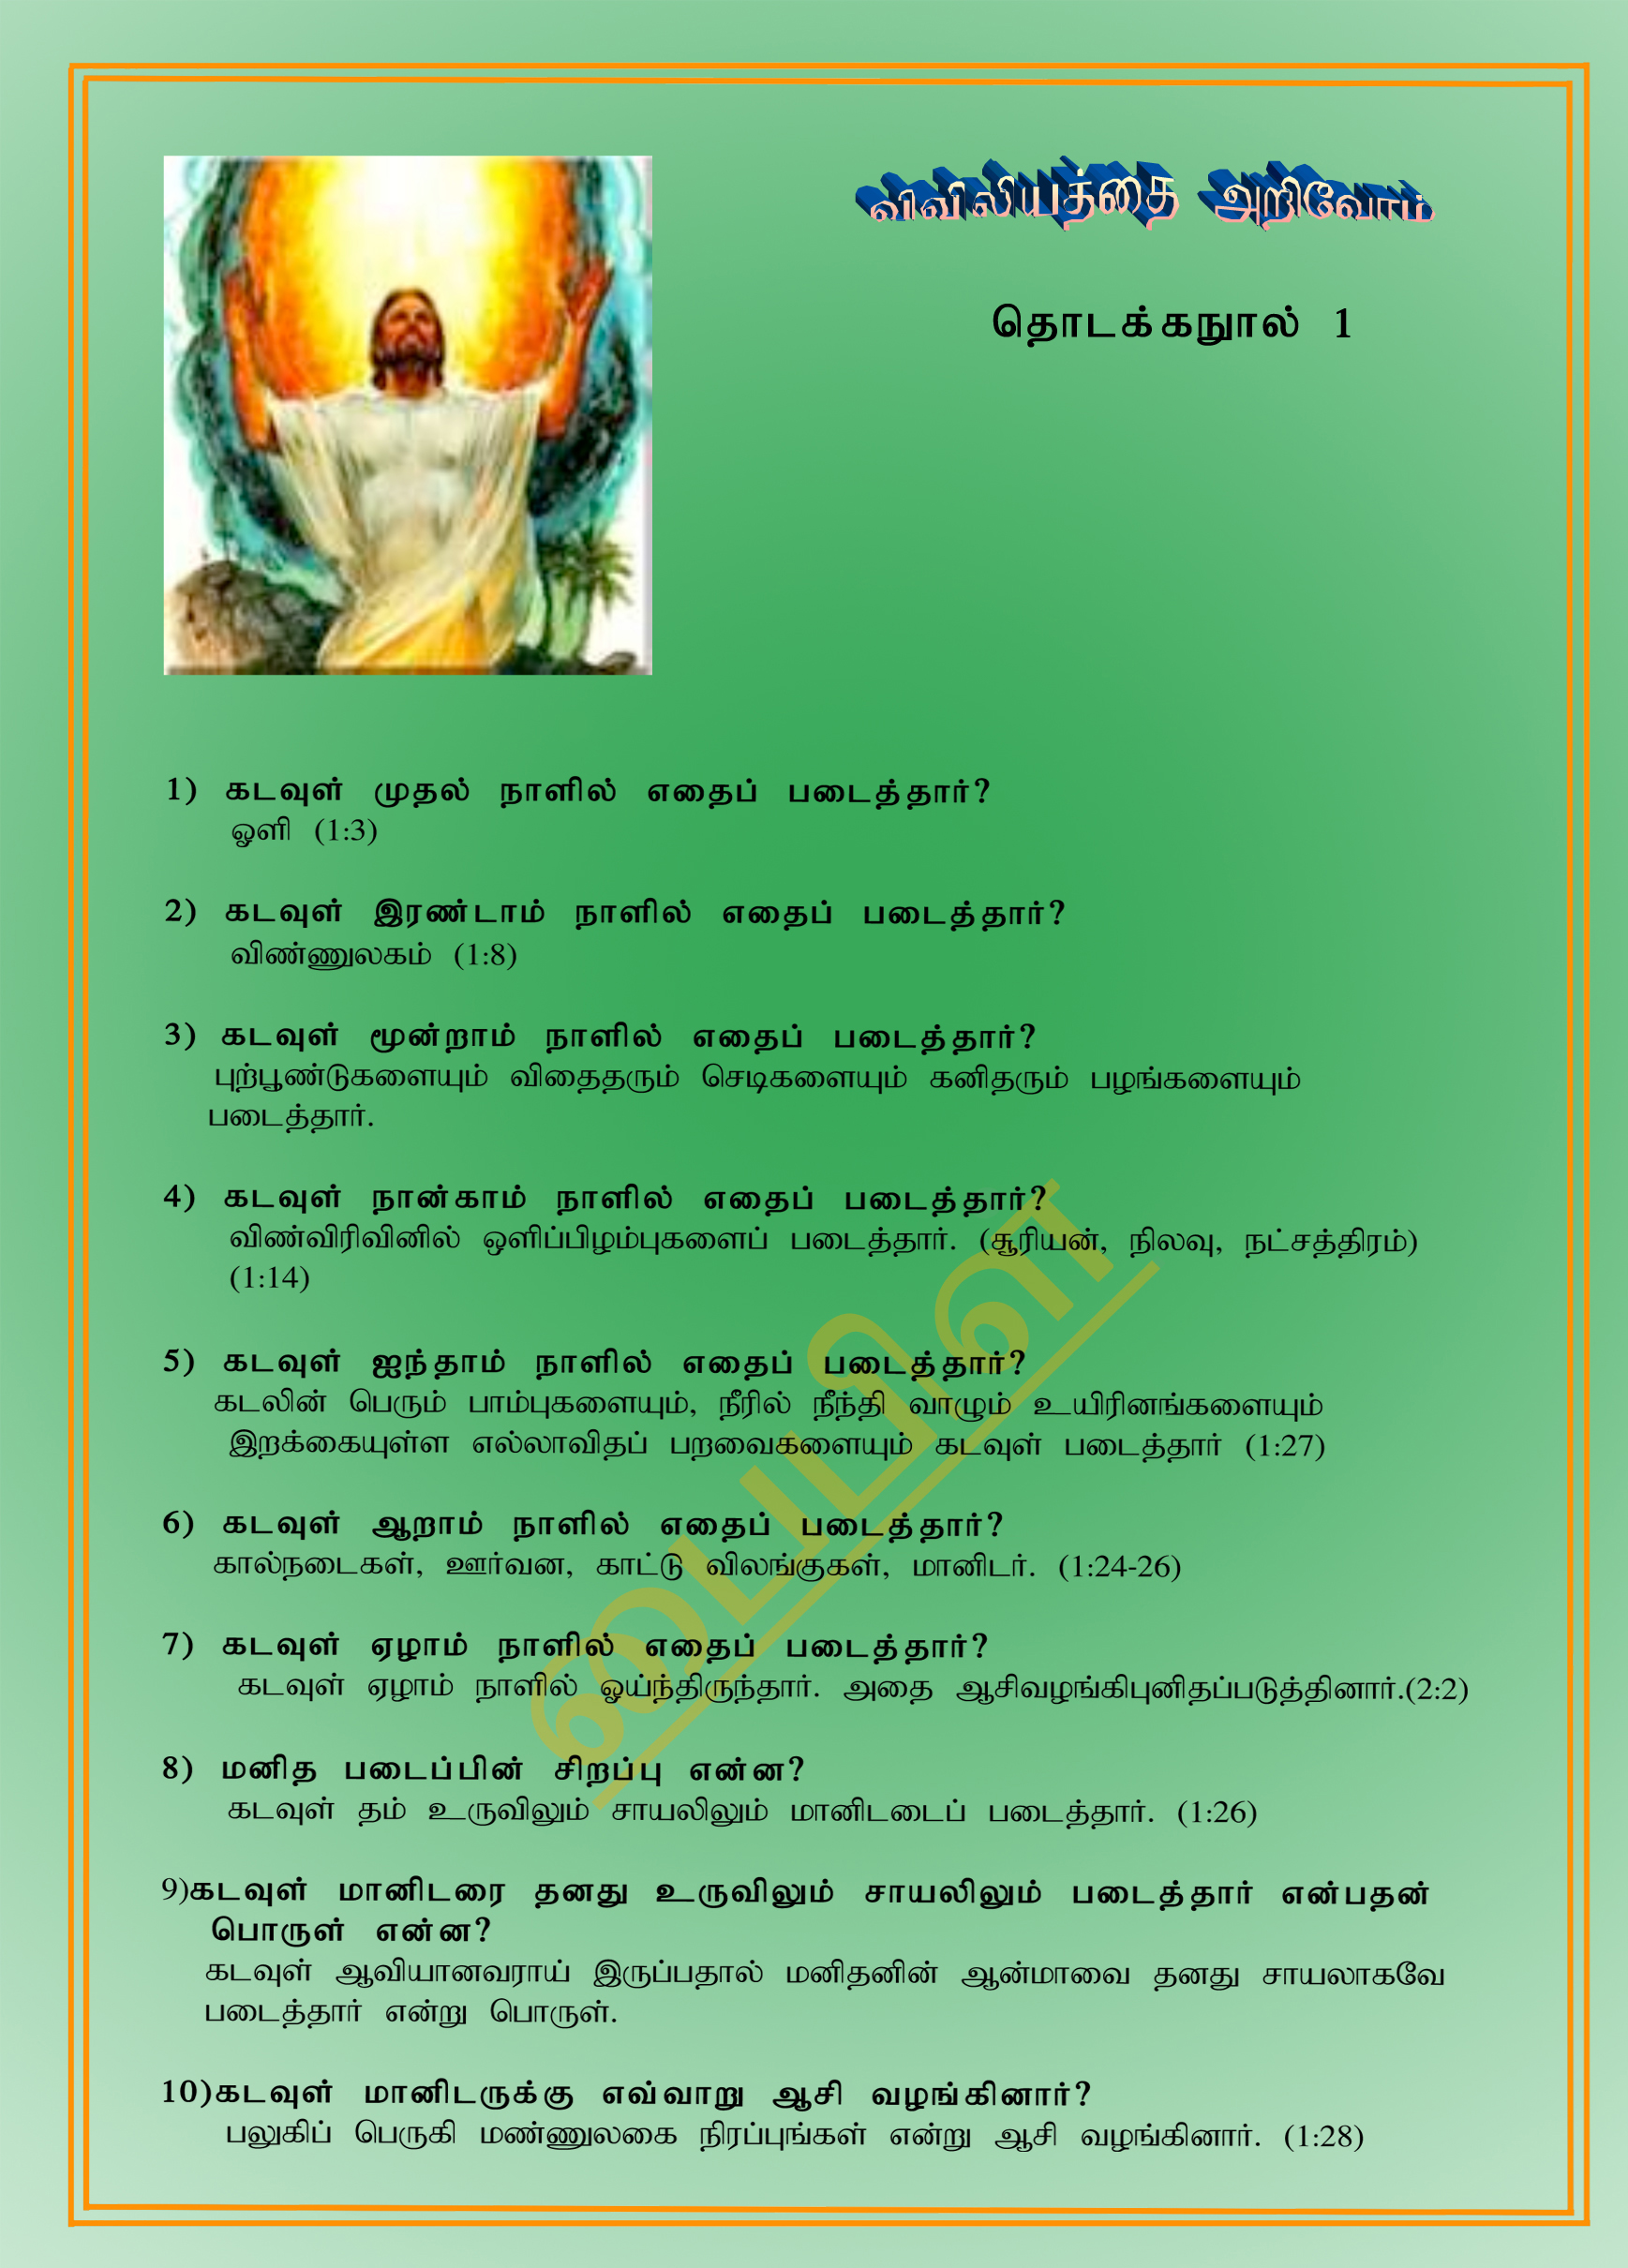 Roman catholic bible in tamil free download for pc